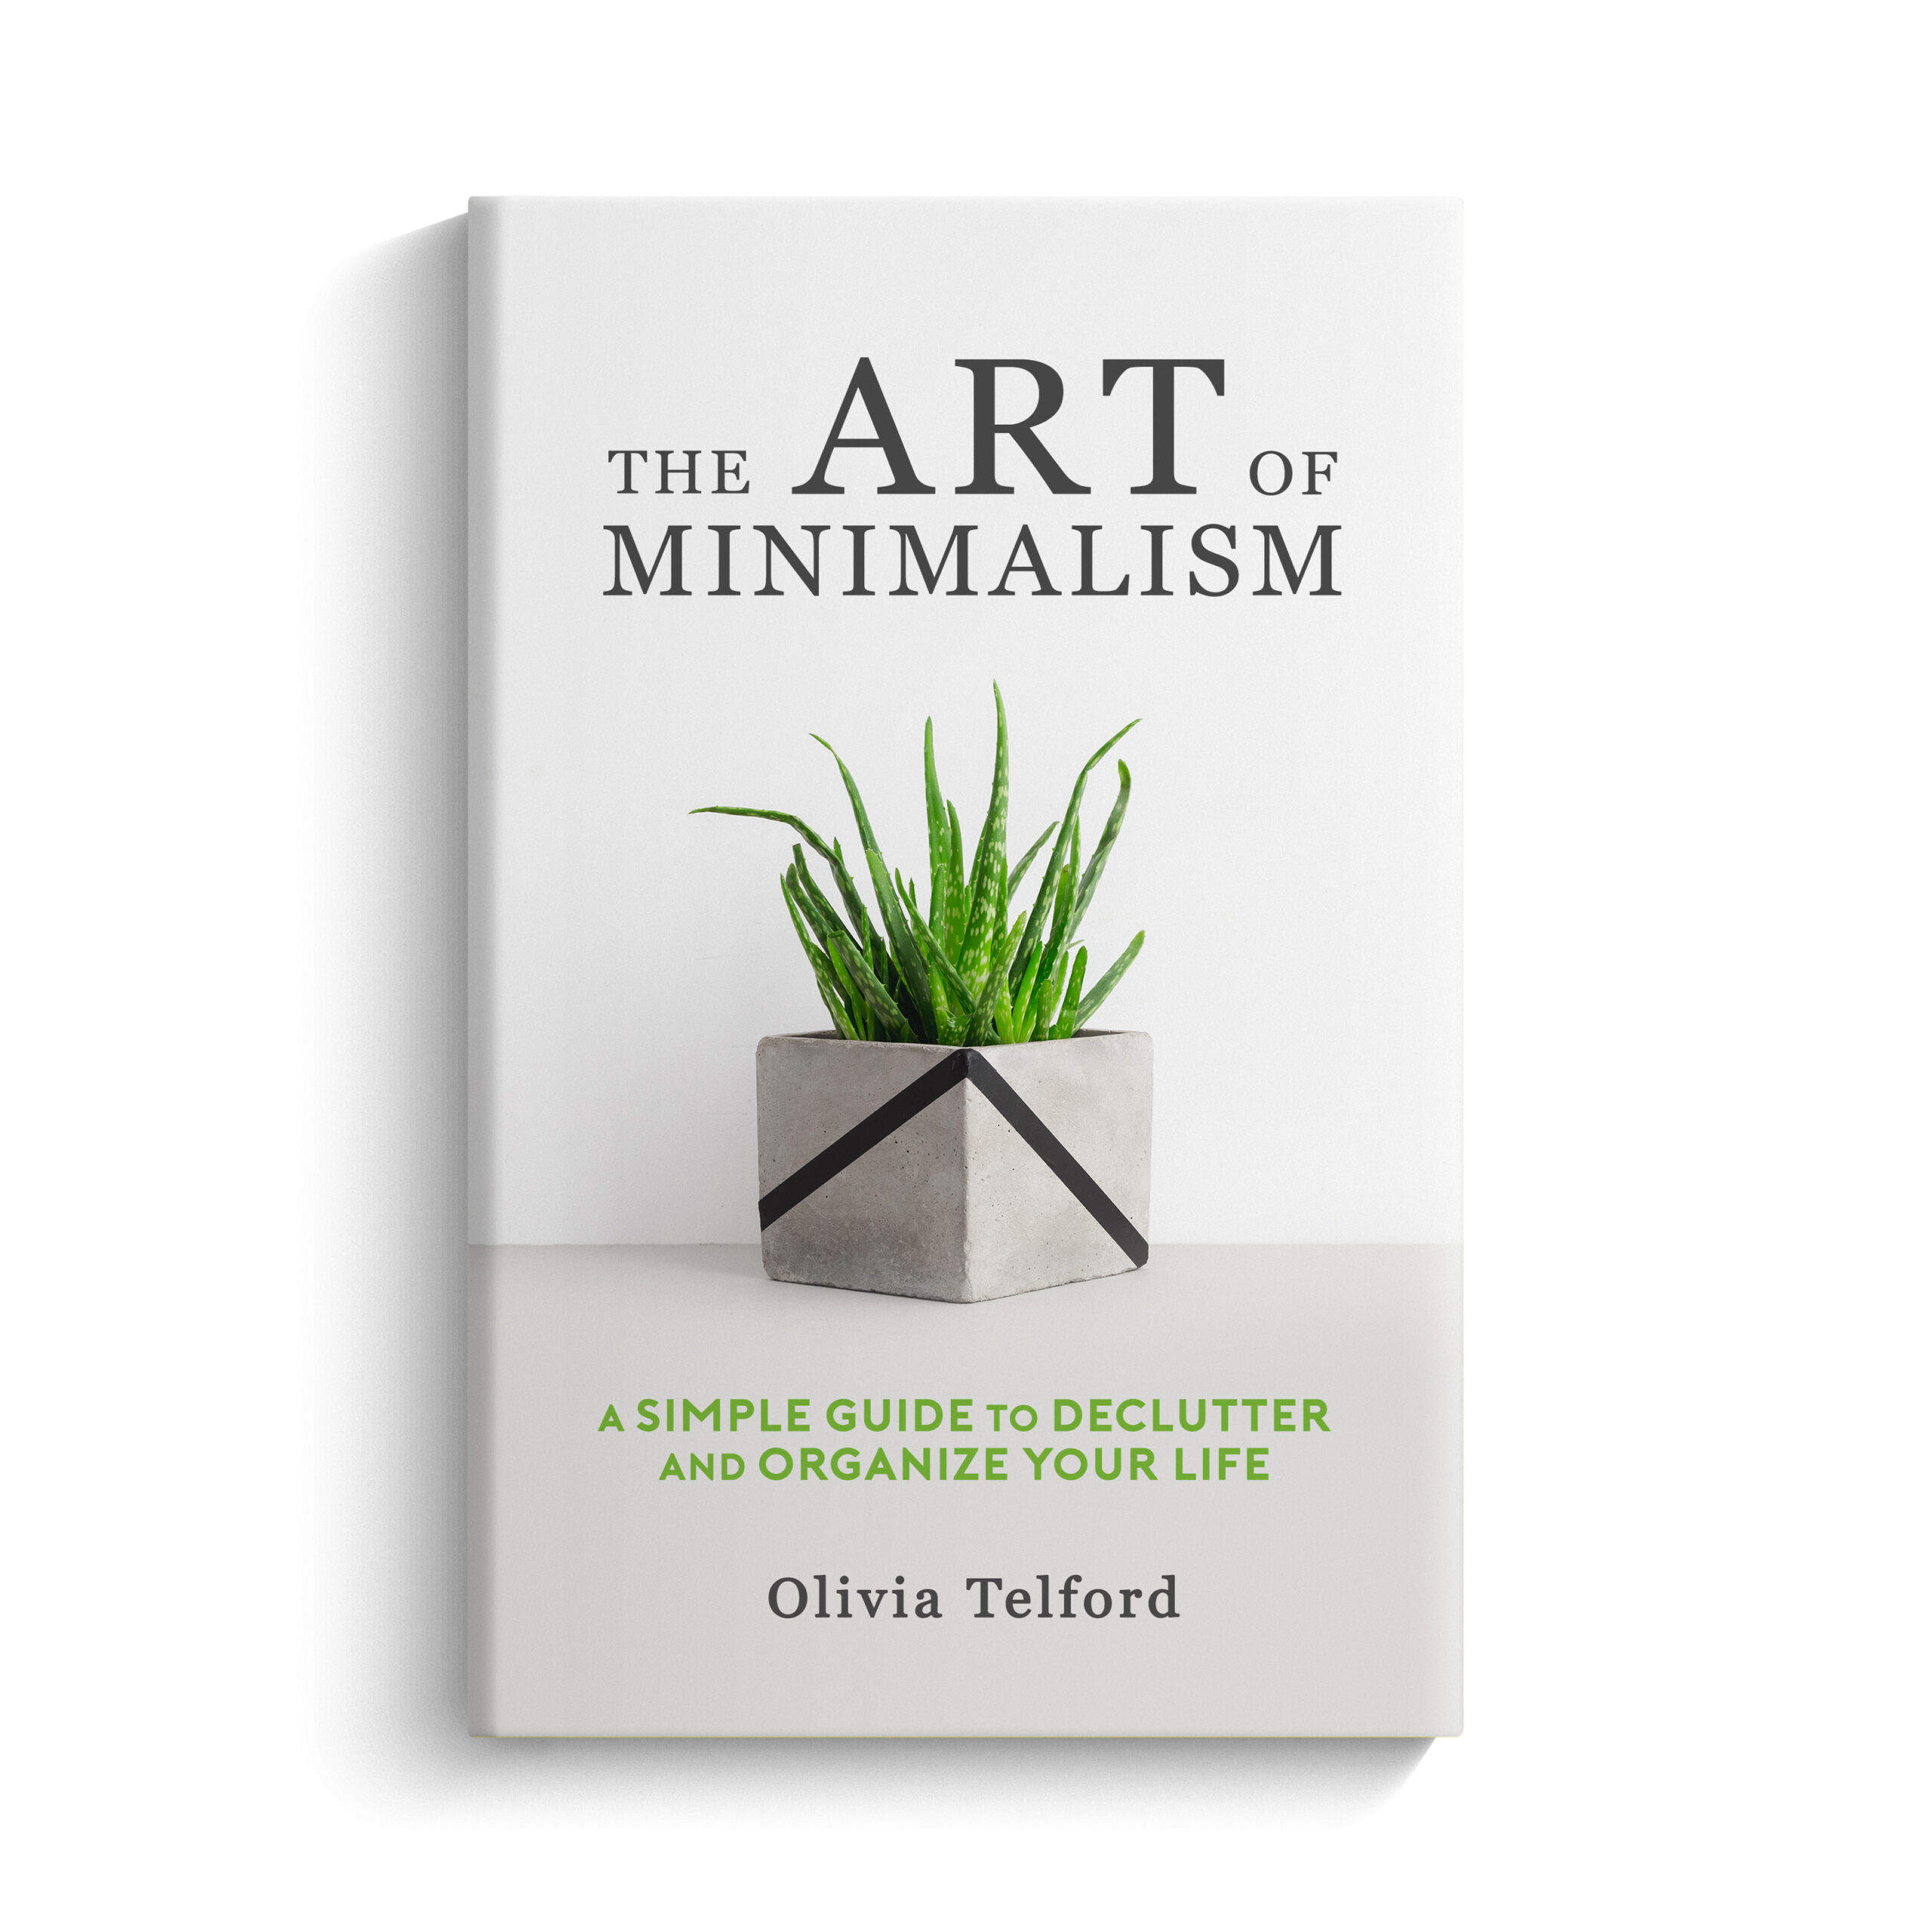 The Art of Minimalism by Olivia Telford